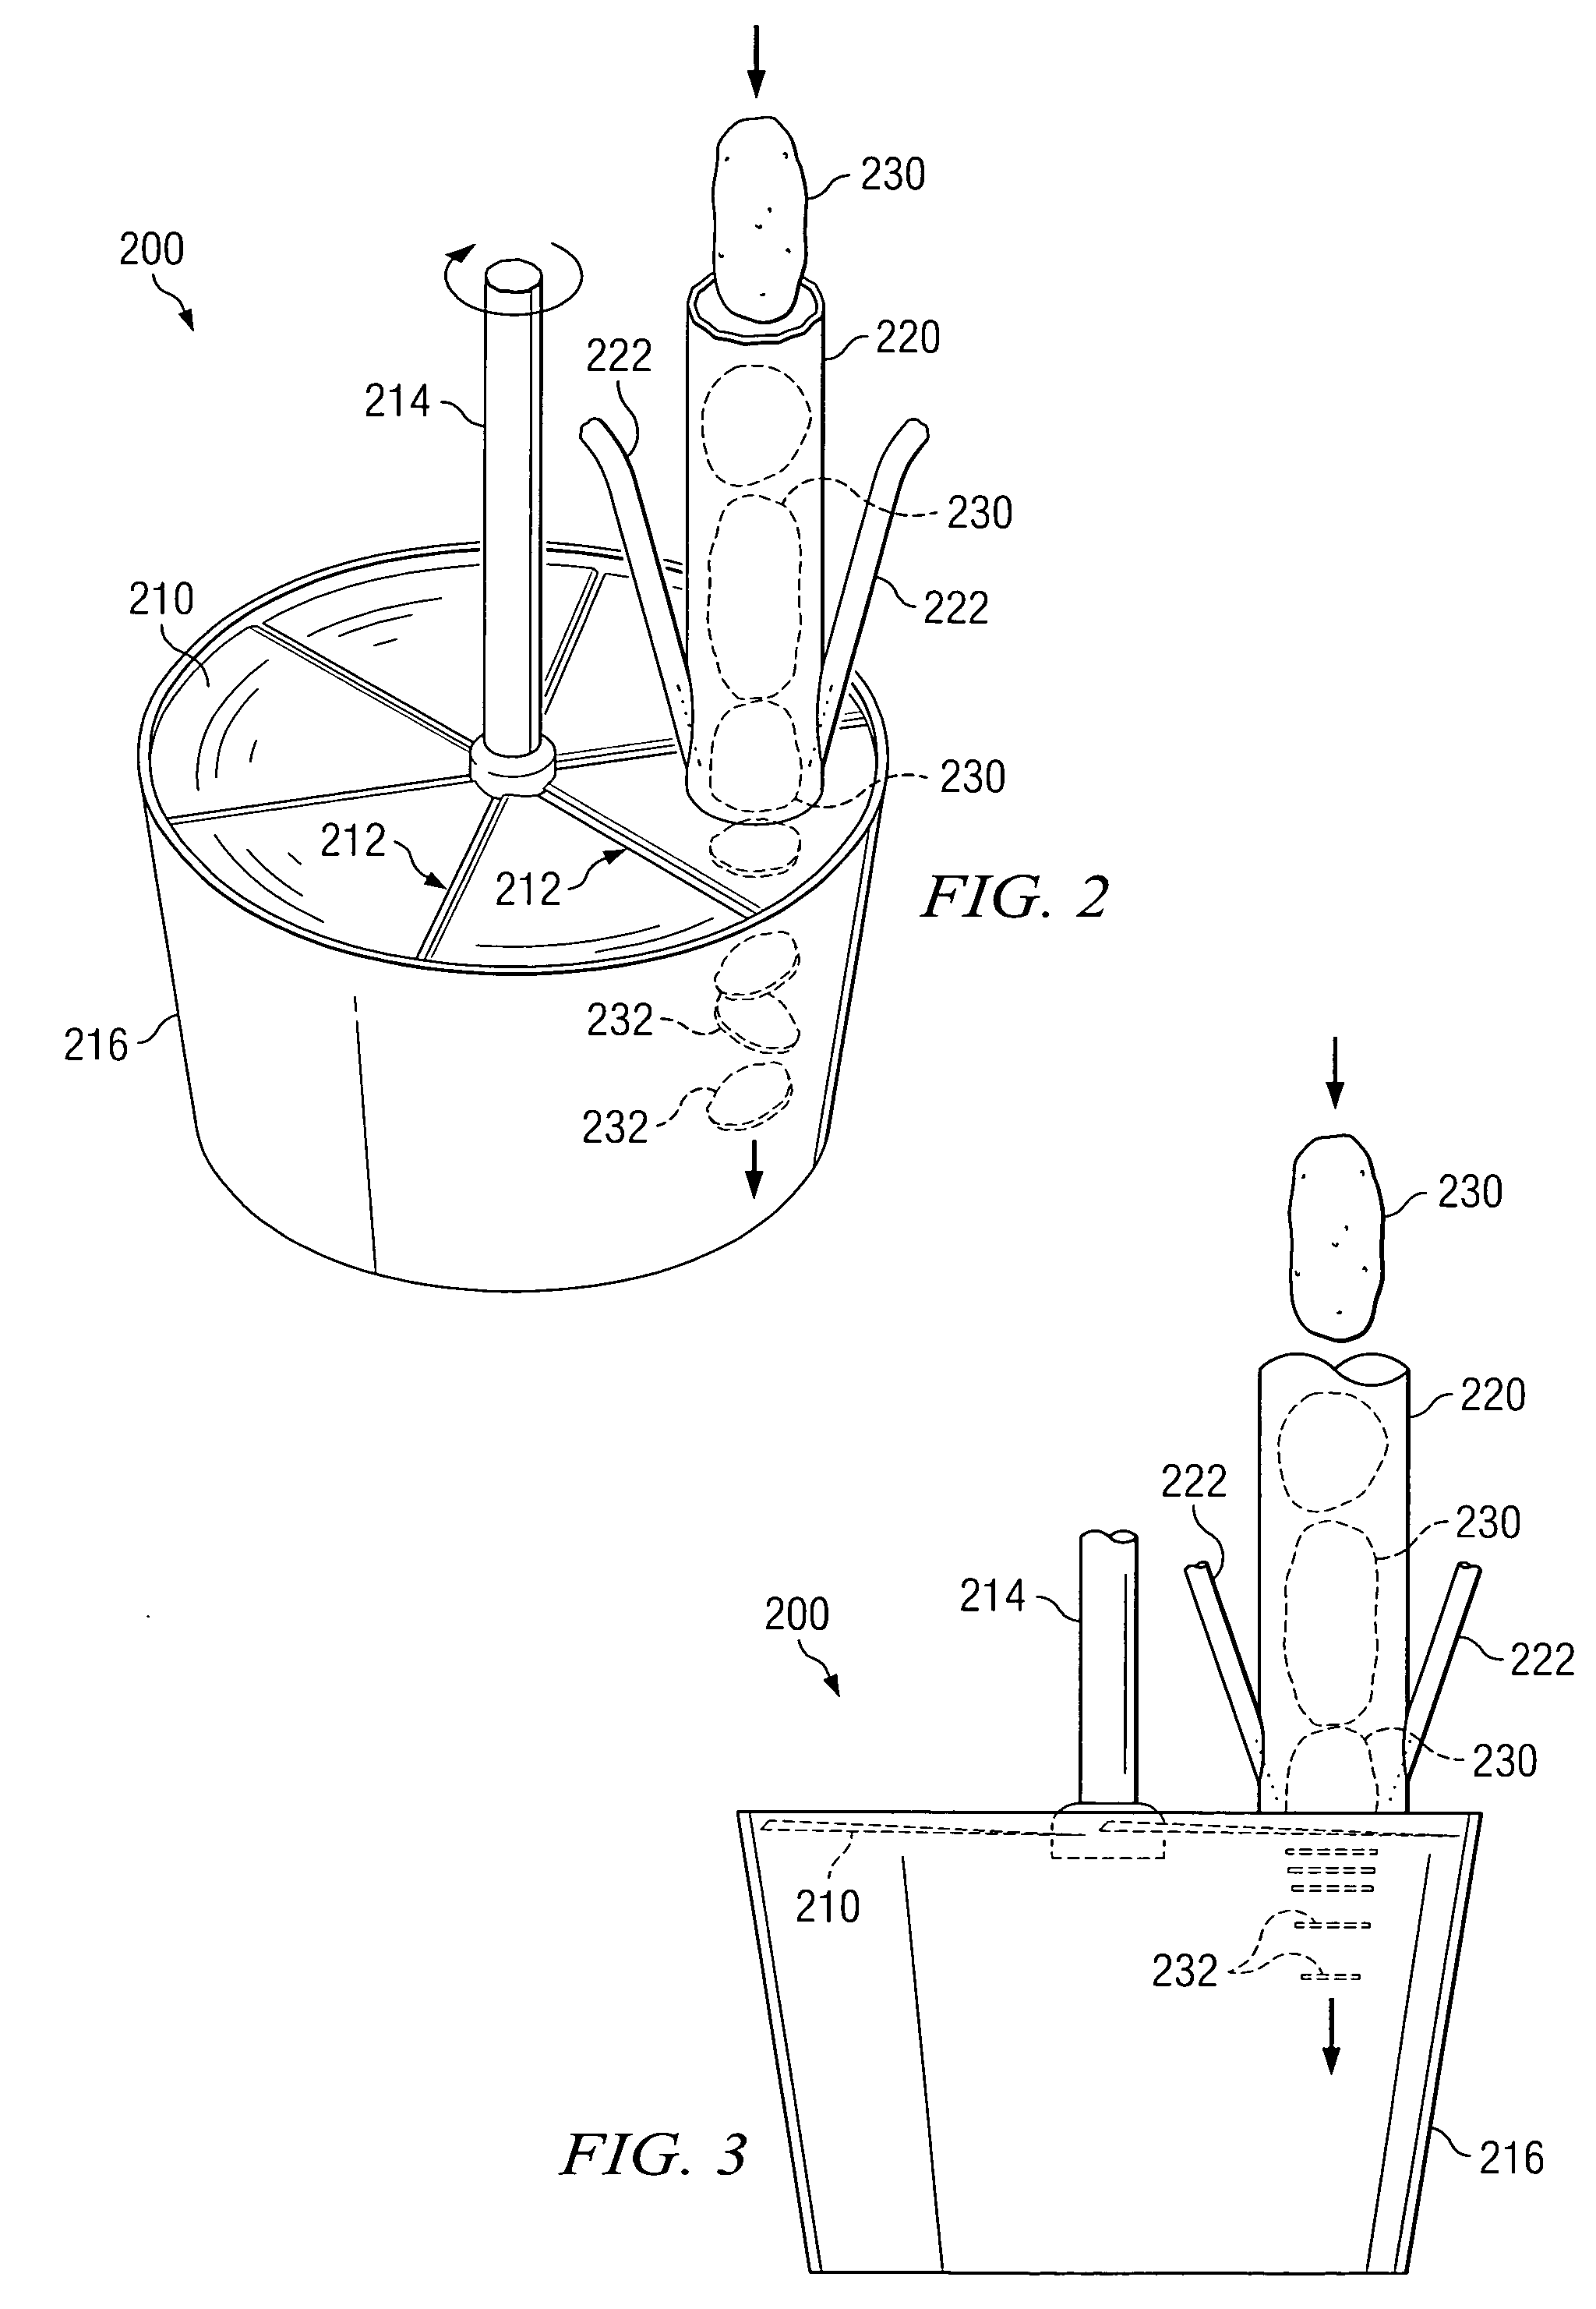 System for conveying and slicing